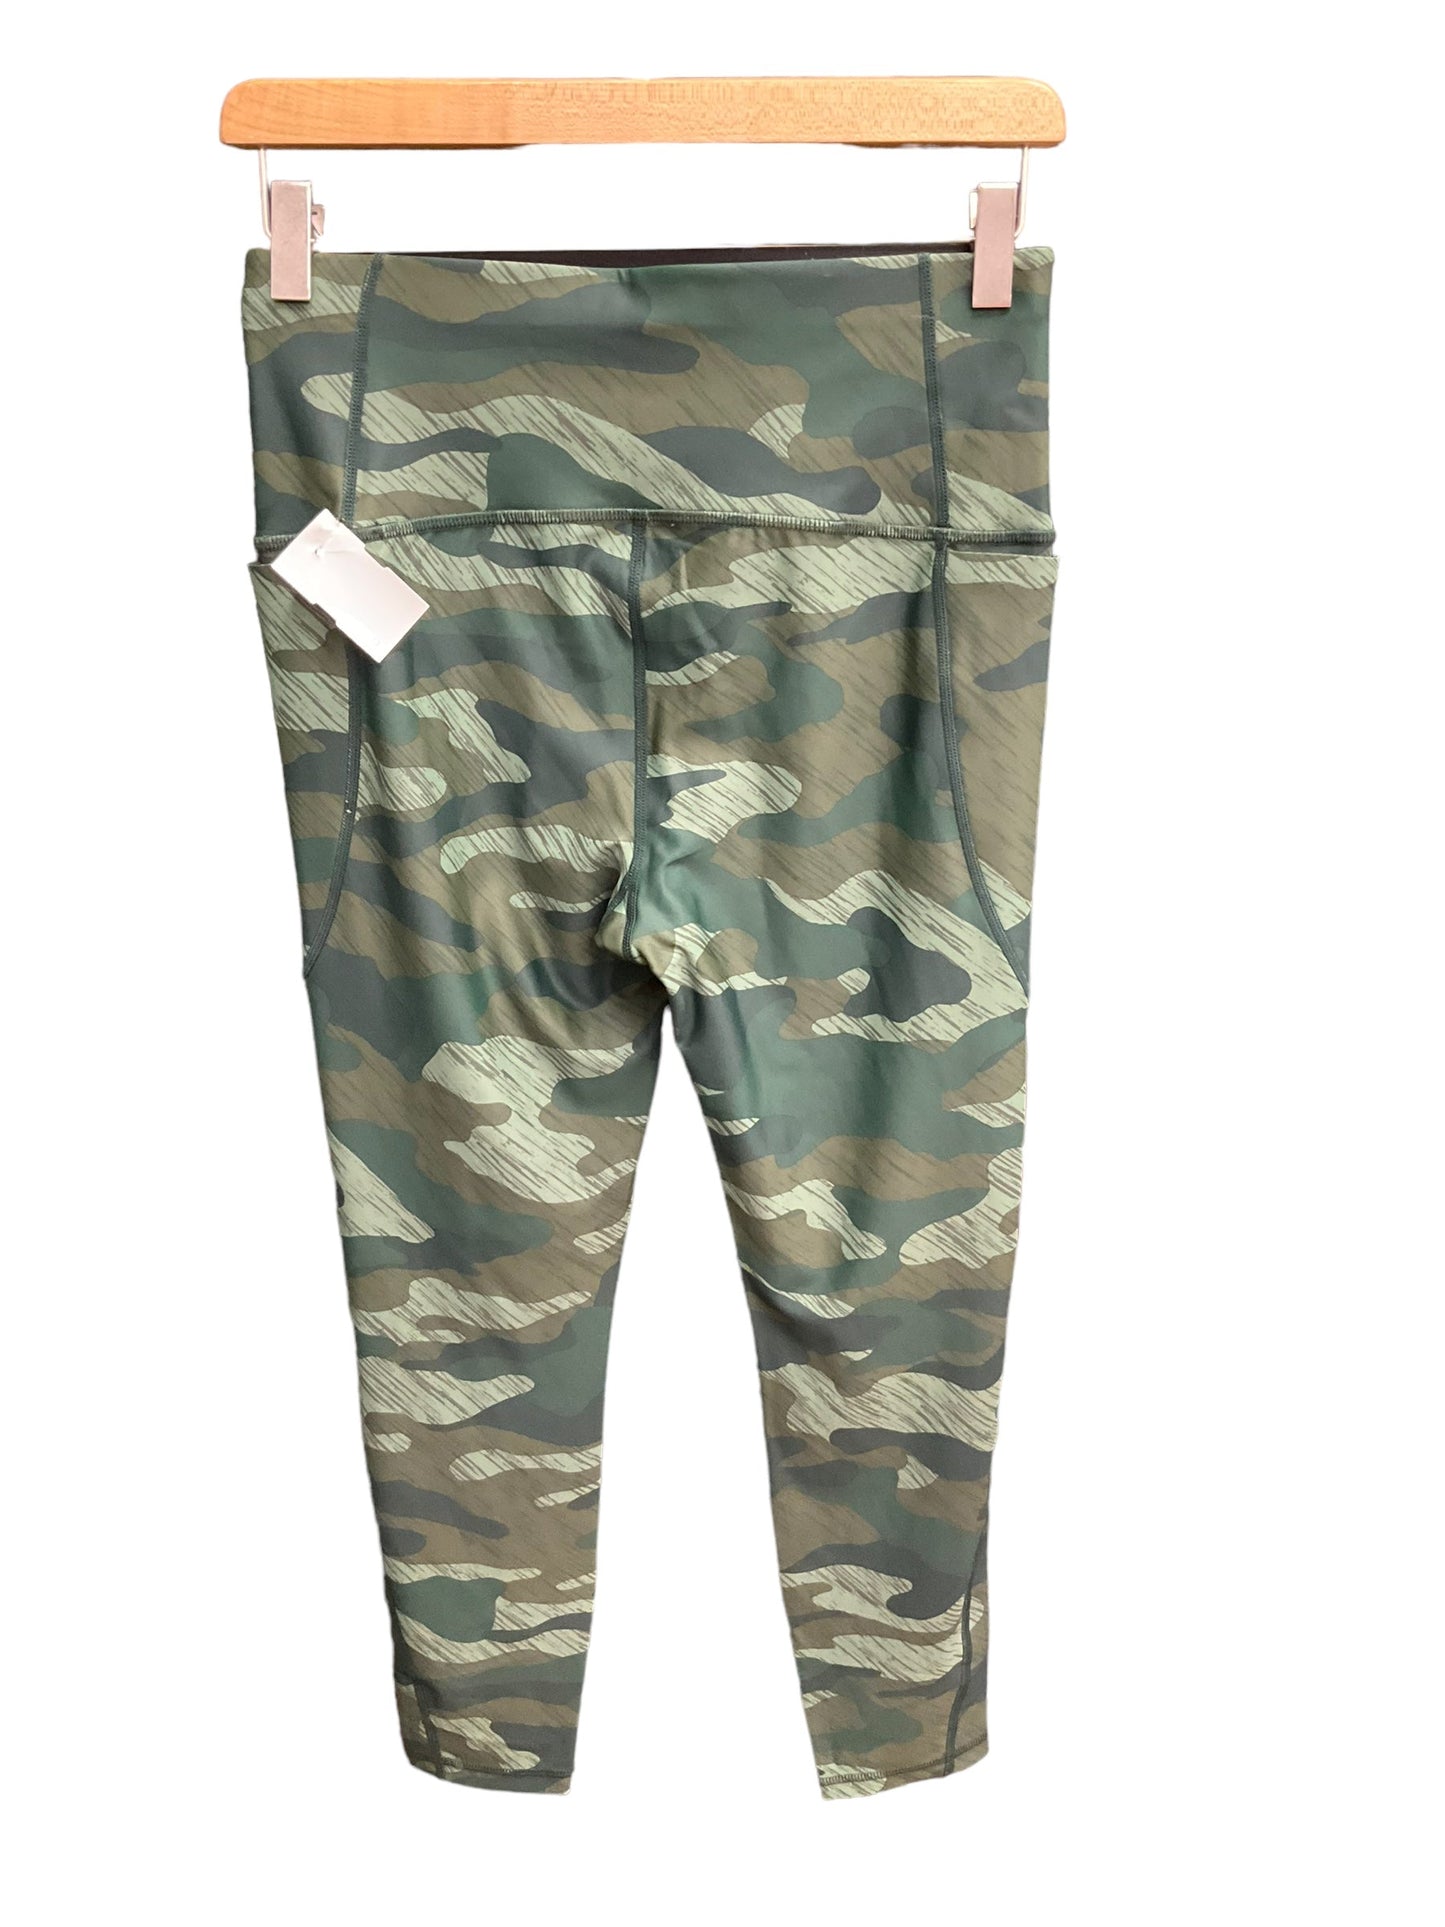 Camouflage Print Athletic Leggings Xersion, Size S